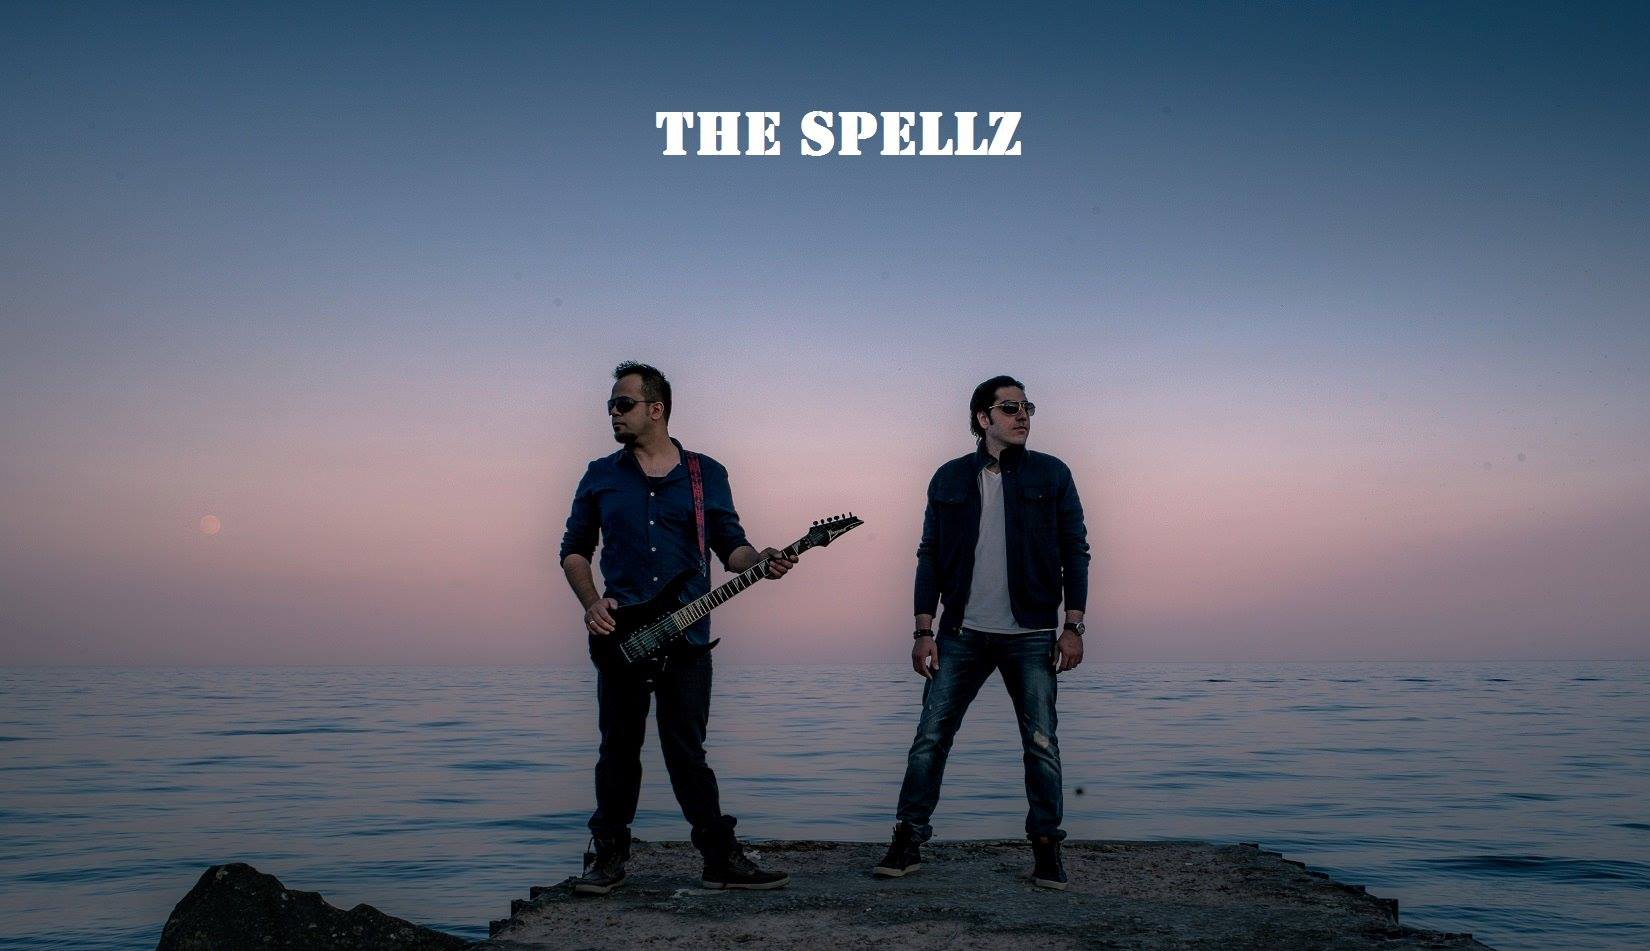 Canadian-Pakistani Artist The Spellz & Daniel Weber Of International Band The Disparrows To Collaborate